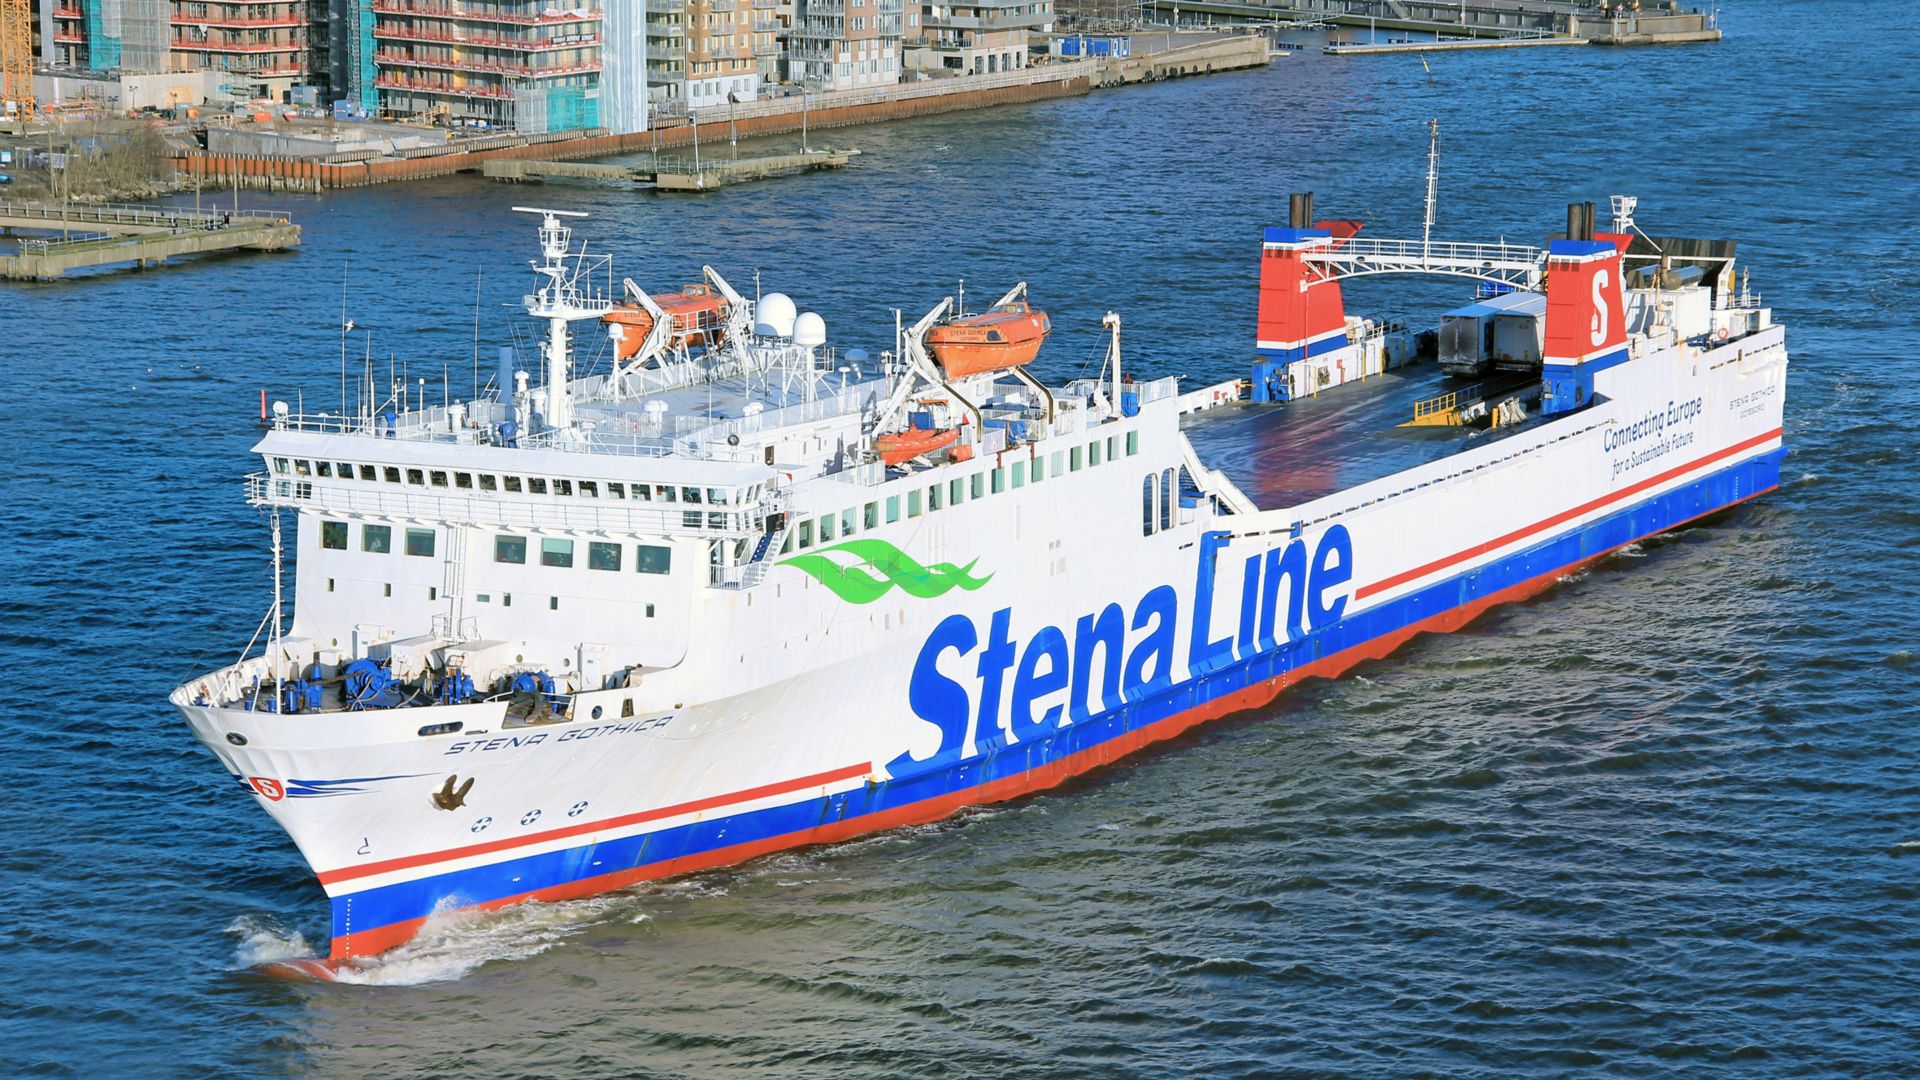 Ferry Stena Gothica quittant le port